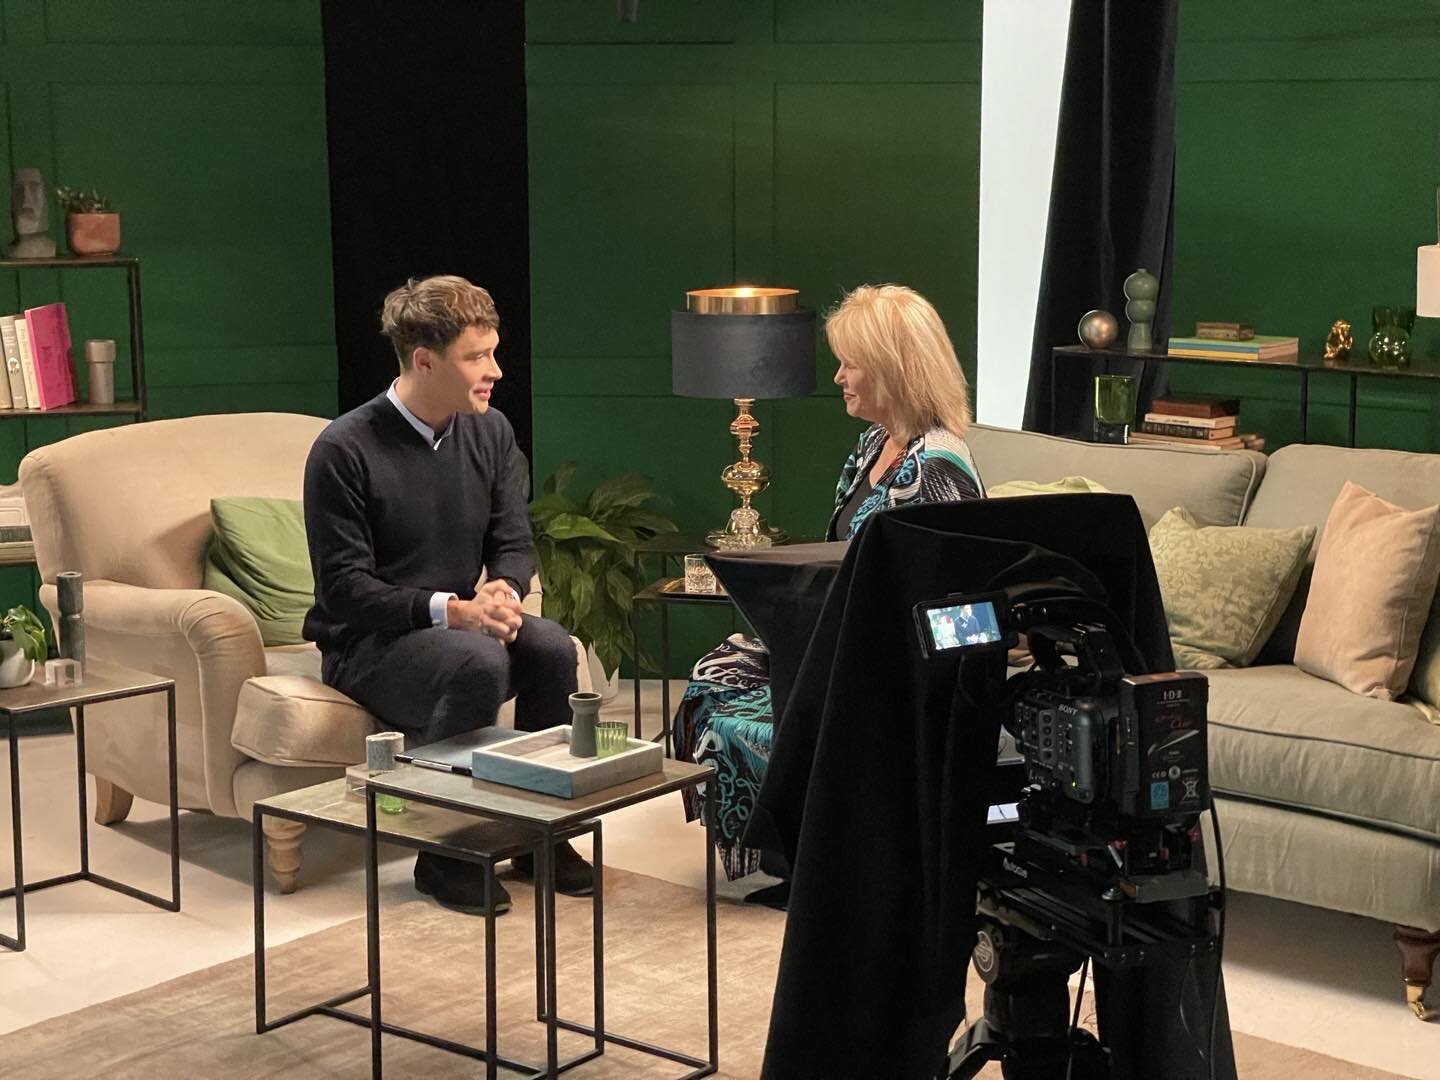 Flashback to when I did a spot of streaming with Joanna Lumley last year. (Yes it&rsquo;s quiet and it&rsquo;s jan I&rsquo;m finally doing my social stuff) anywho the shoot was absolutely fabulous&hellip;. Well it wasn&rsquo;t but it was.
#livestream